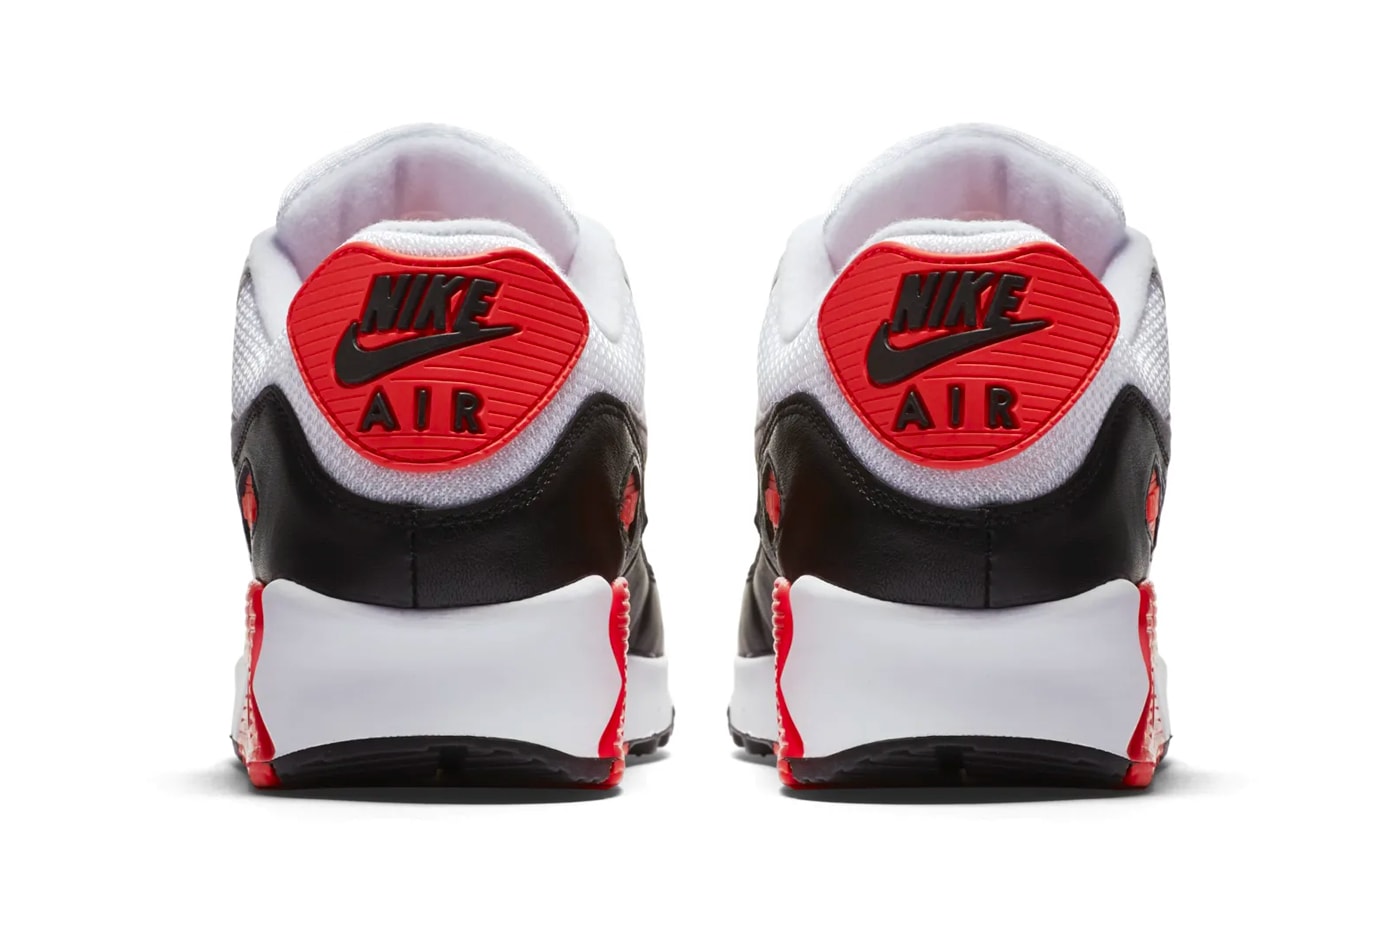 Nike Air Max 90 Infrared OG 2020 Release Date Info CT1685-100 Buy Price Grade Pre Toddler Infant 